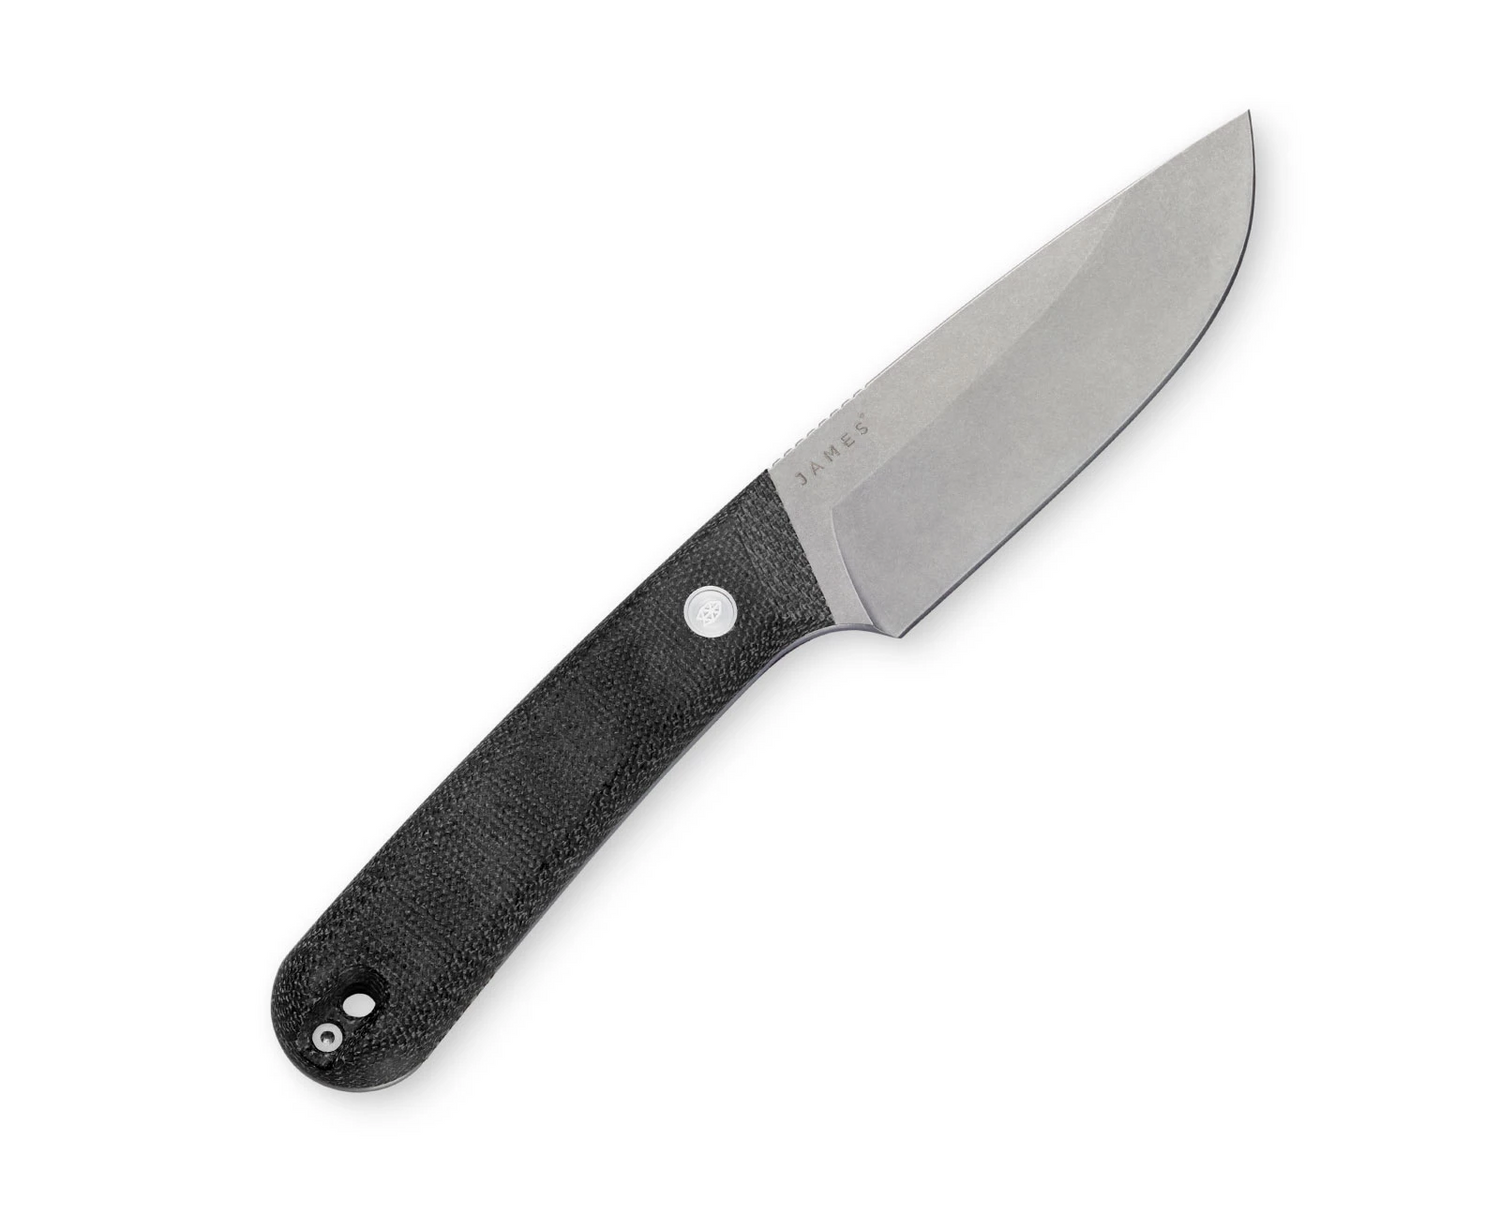 The Hell Gap knife with black handle and stainless steel blade.